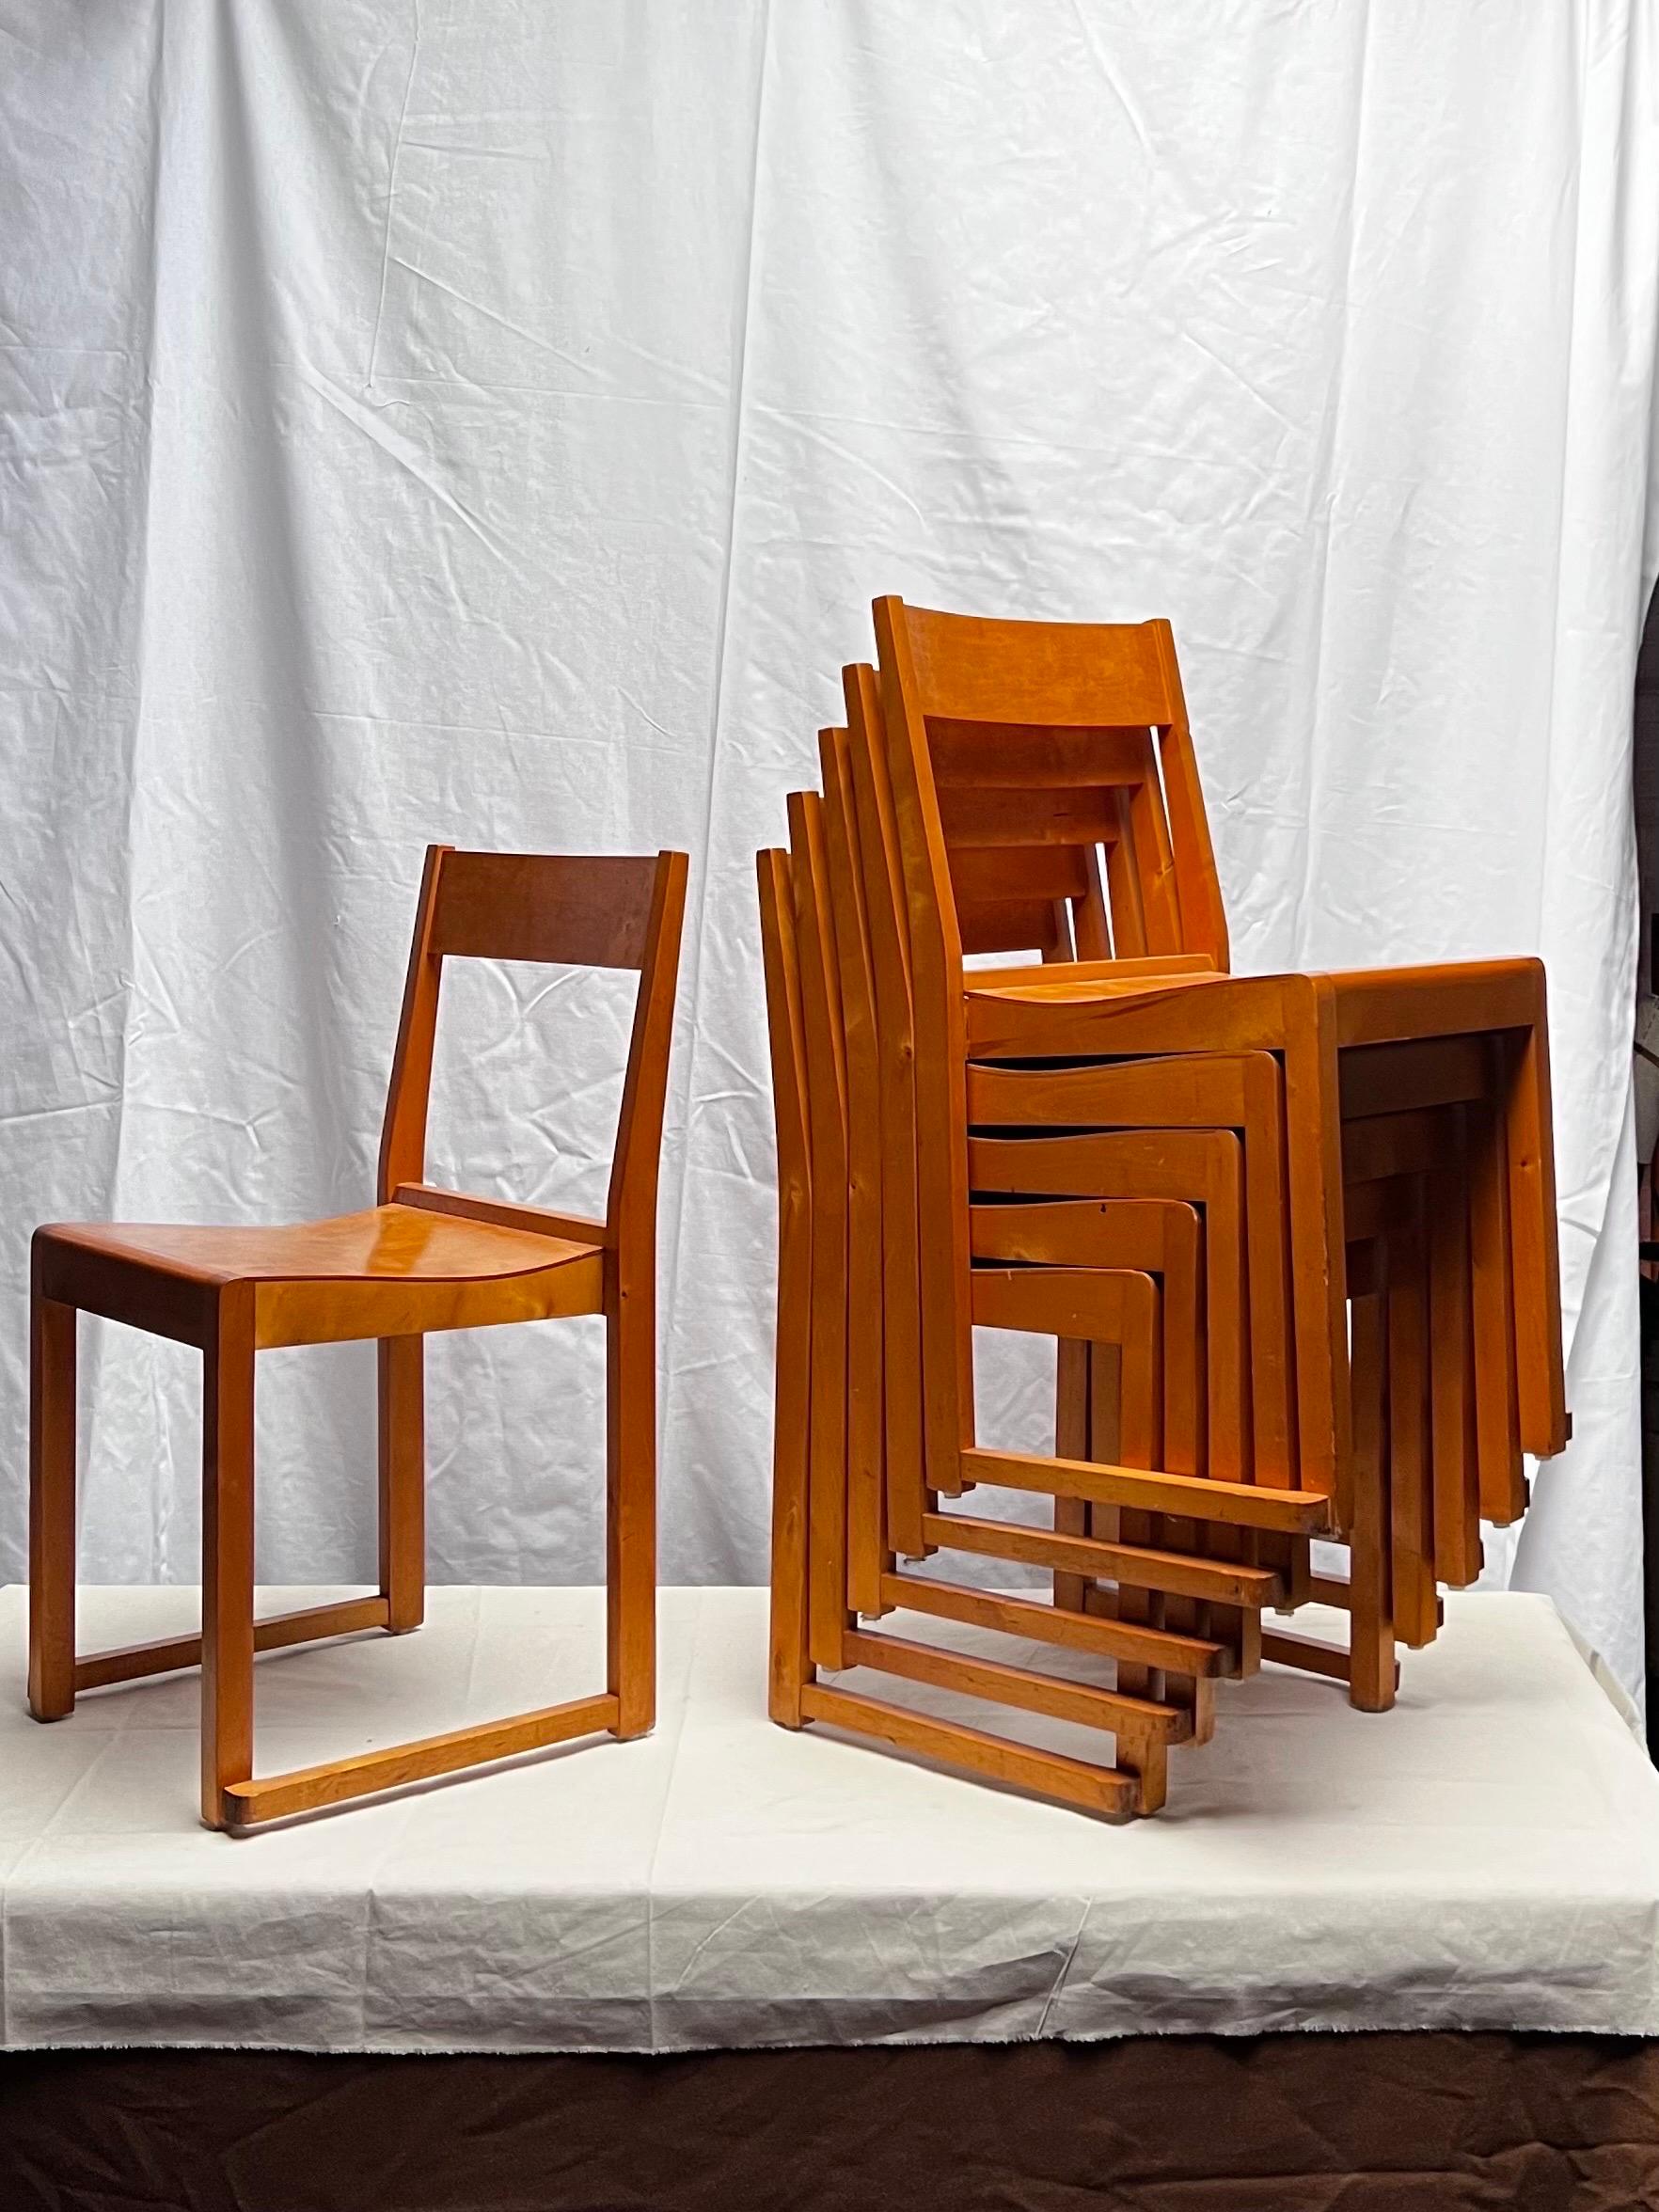 Set of 6 minimal and elegant lightweight confortable stacking chairs by modernist architect Sven Markelius. Designed and produced for the orchestra of the Helsingborg theater in Sweden in 1931. These are honey brown stained birch in very unusual